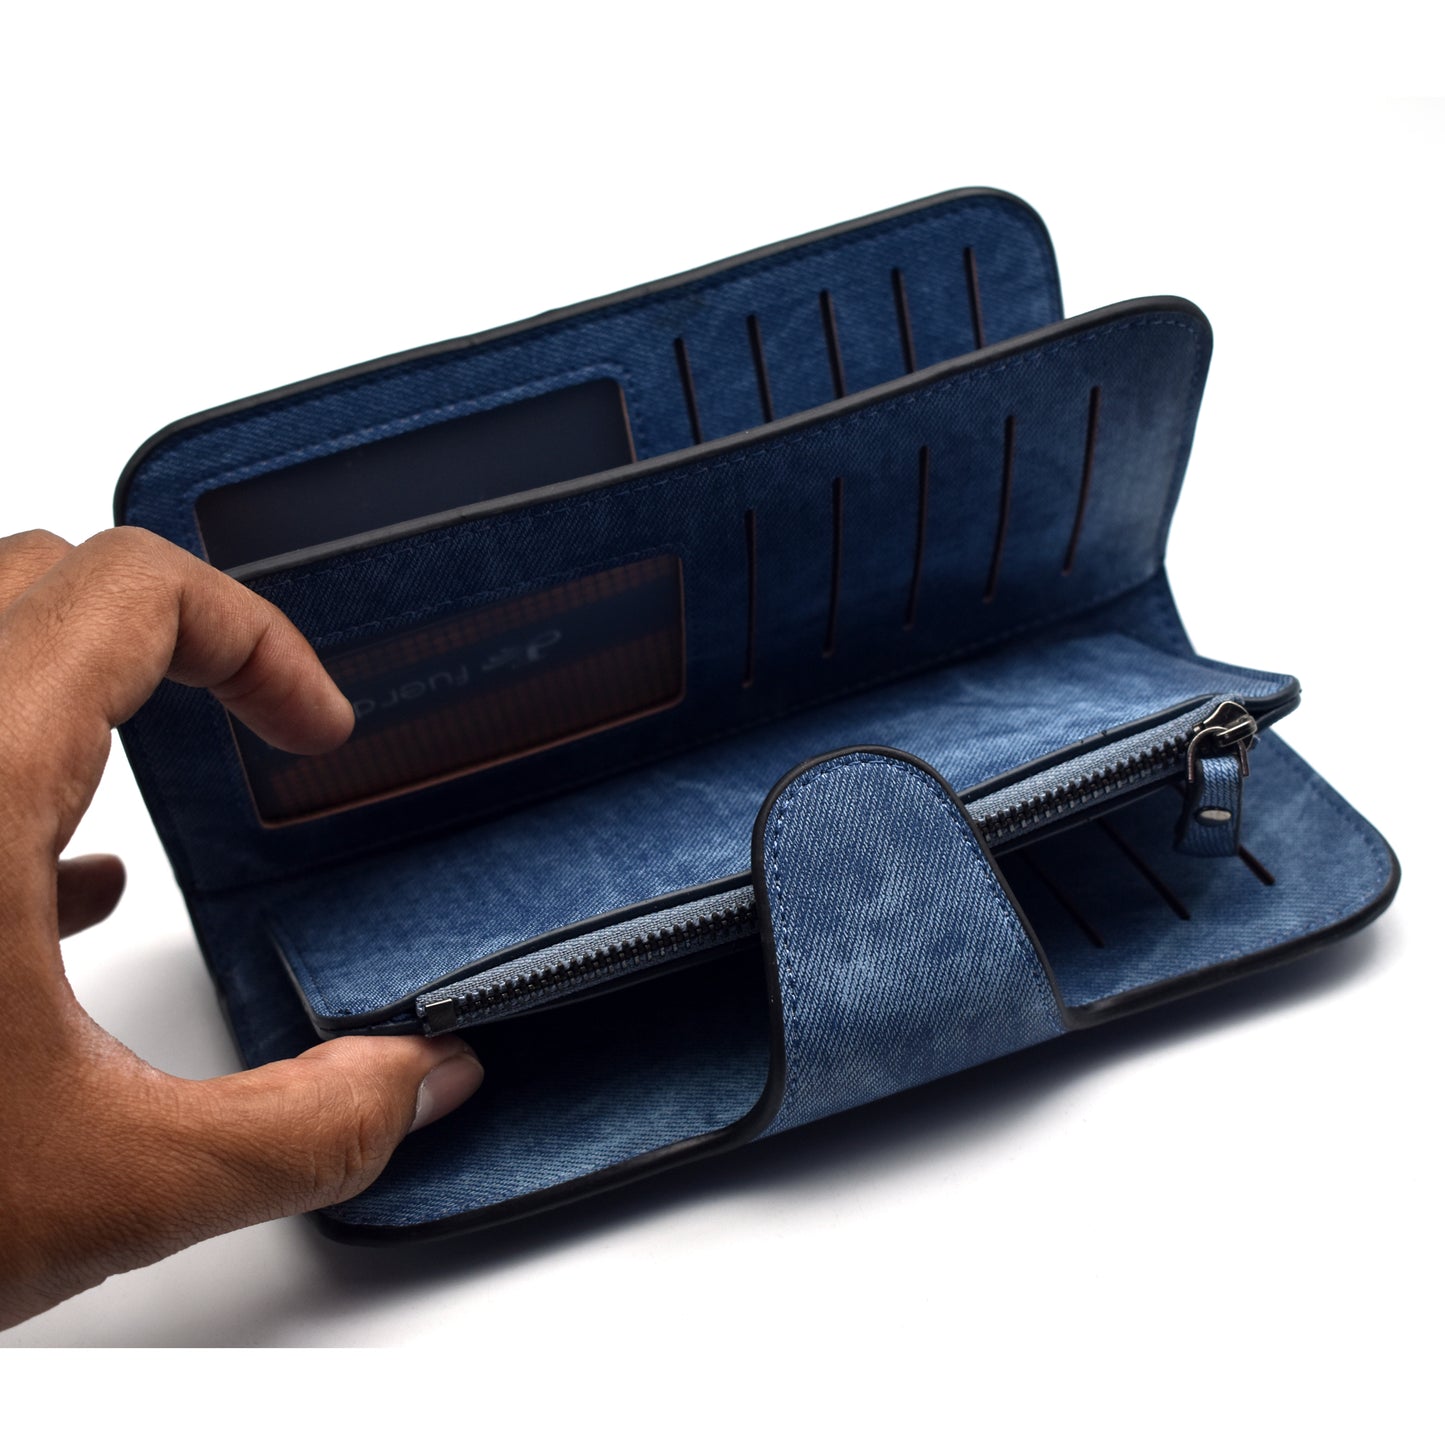 Fuerdanni Long Multi Purpose Wallet Imported from China - Fuerdanni 04